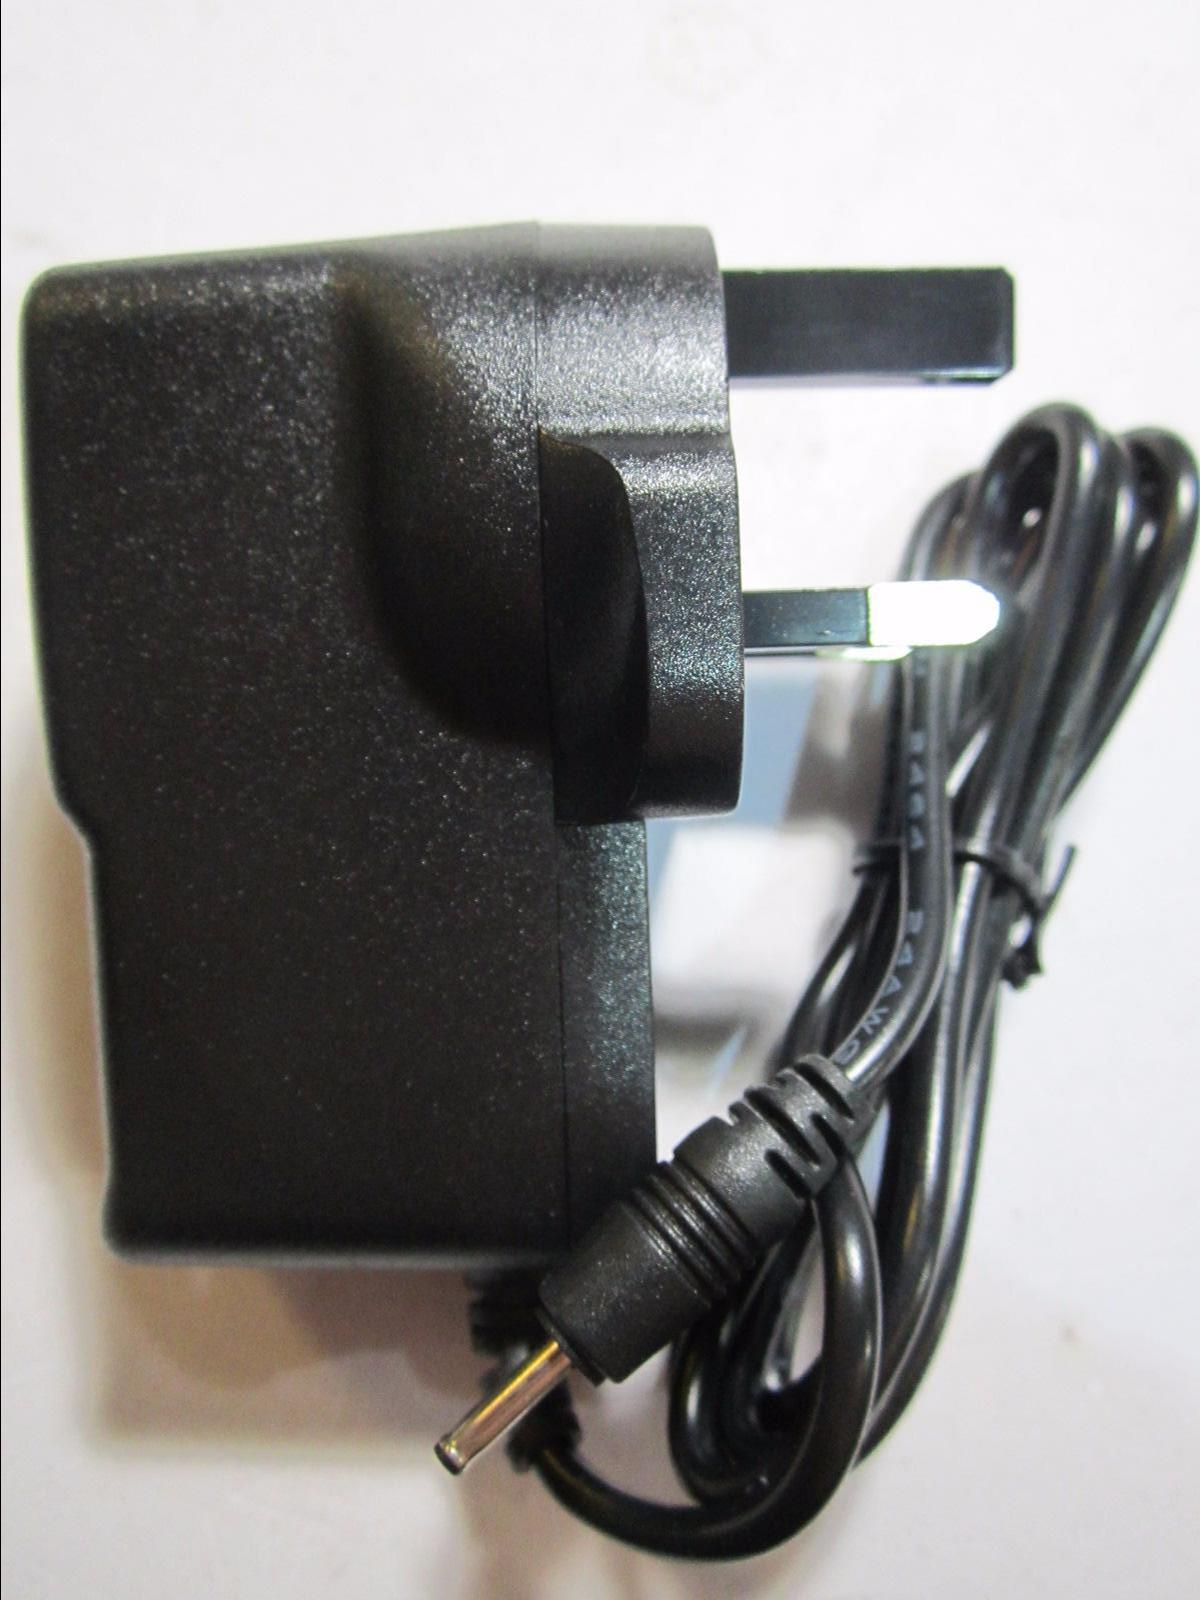 5V 2.0A AC Power Adaptor Charger 4 Avoca 7" Android Tablet STB7012 SAPA05010UK 